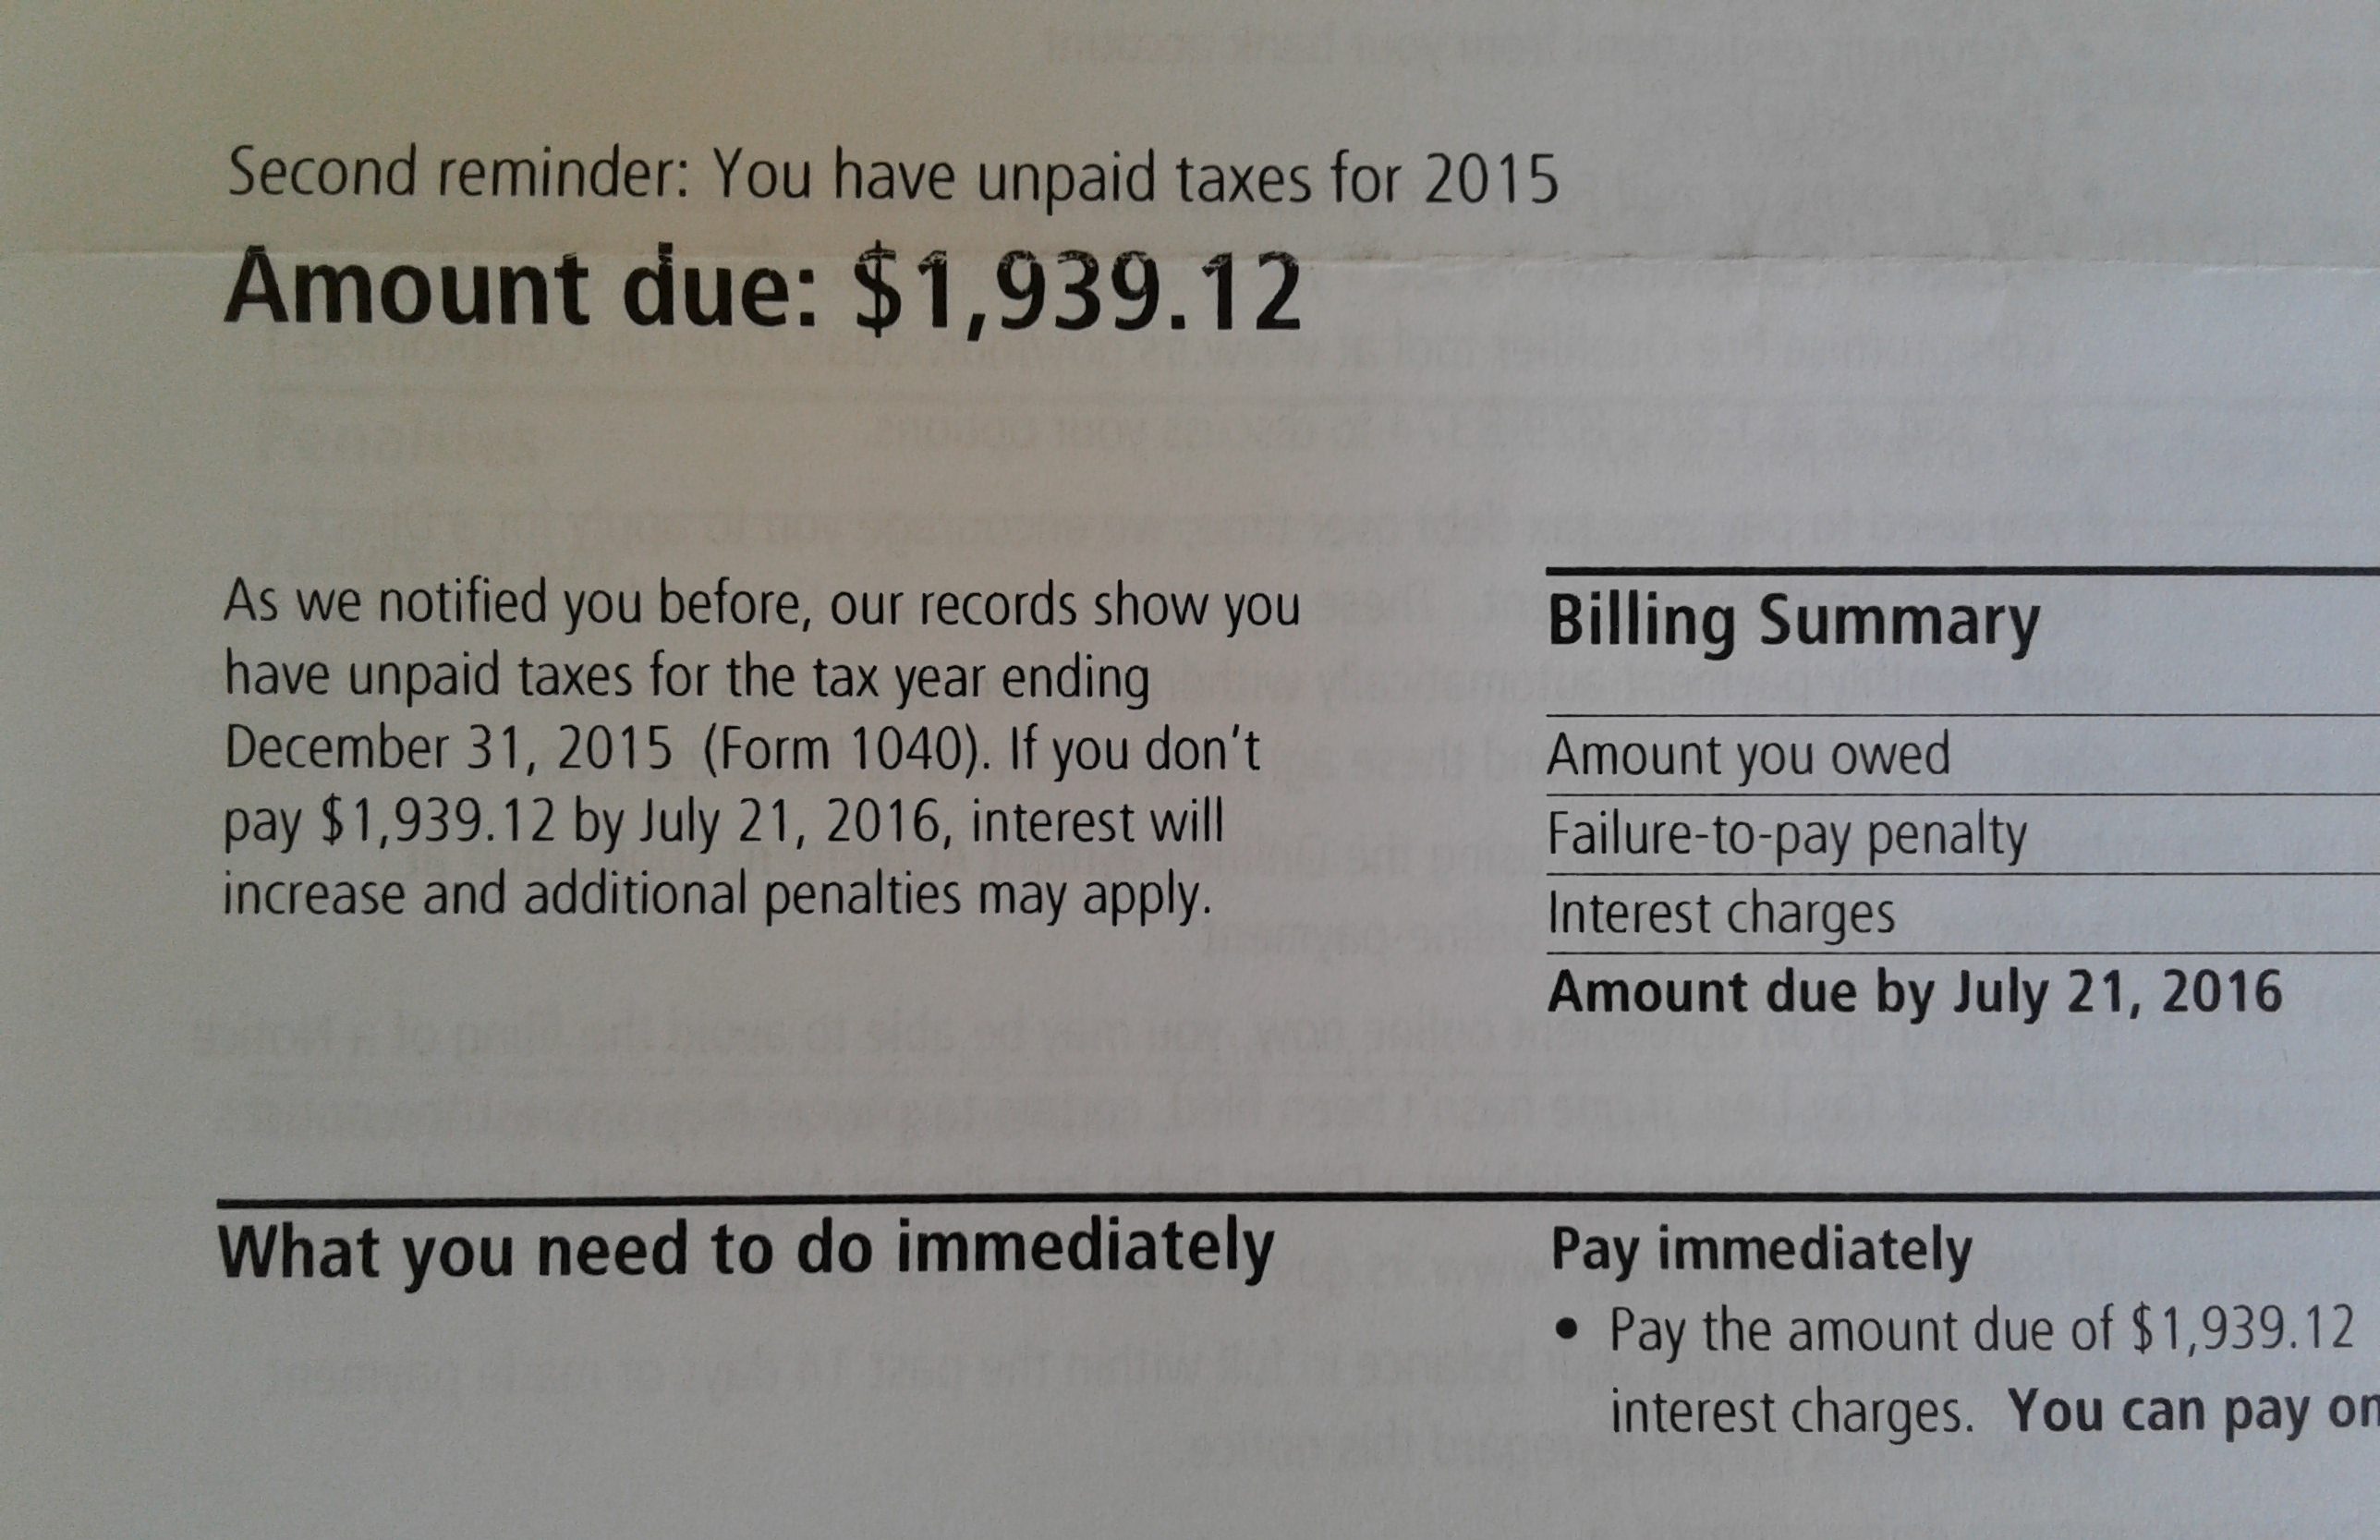 image of IRS letter with heading "Second reminder: You have unpaid taxes for 2015 - Amount due: $1,939.12"